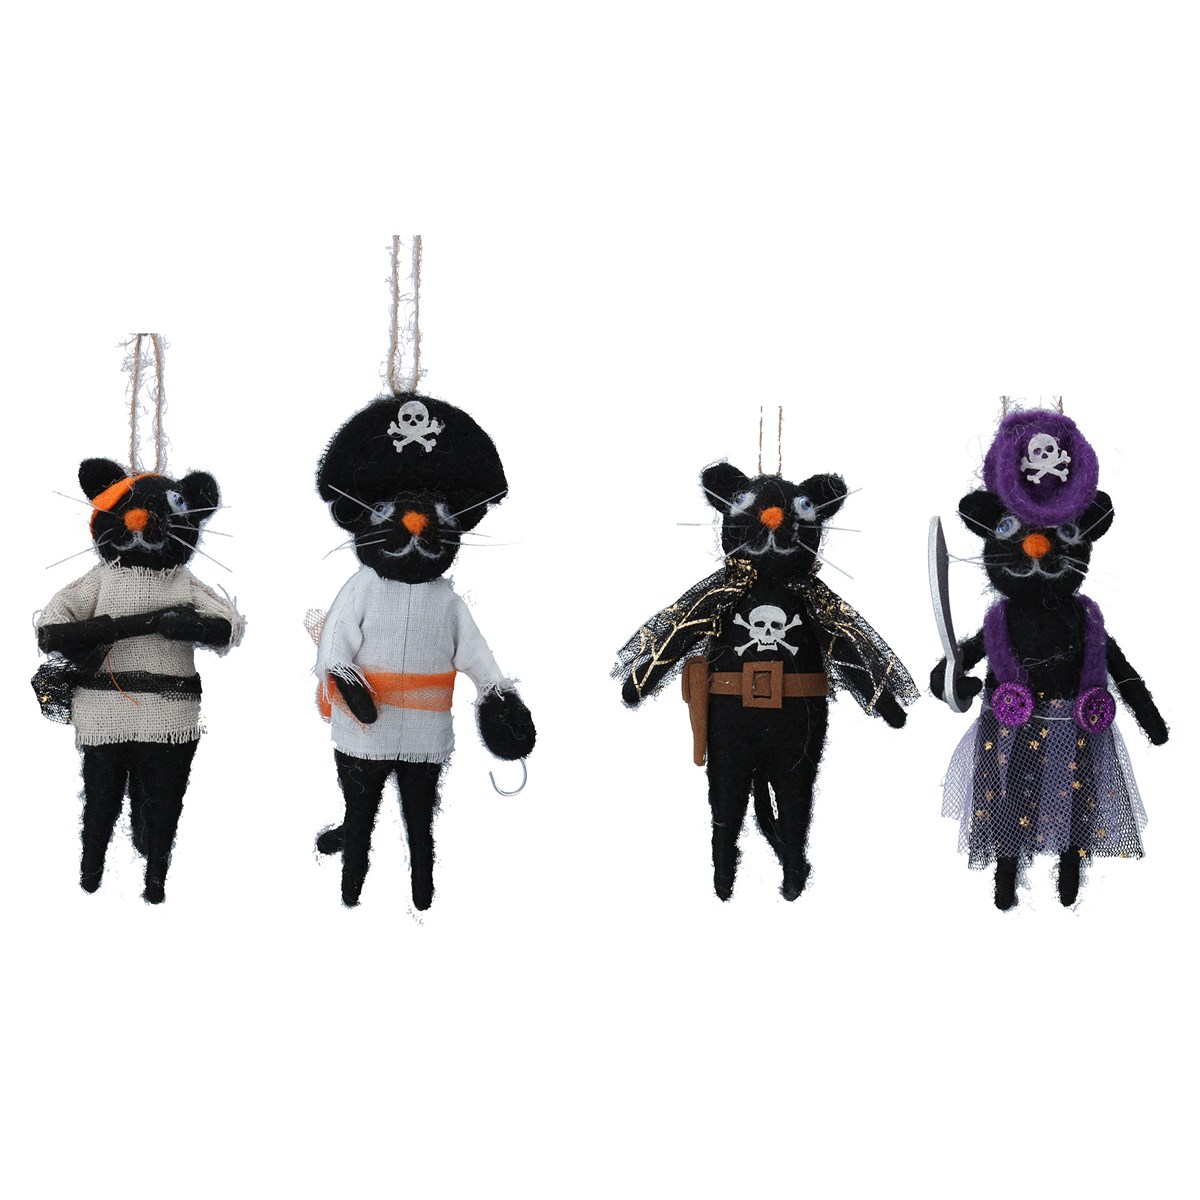 Choice of 4 designs. Wool pirate cat hanging Halloween decorations. By Gisela Graham. The perfect addition to your home this Halloween.